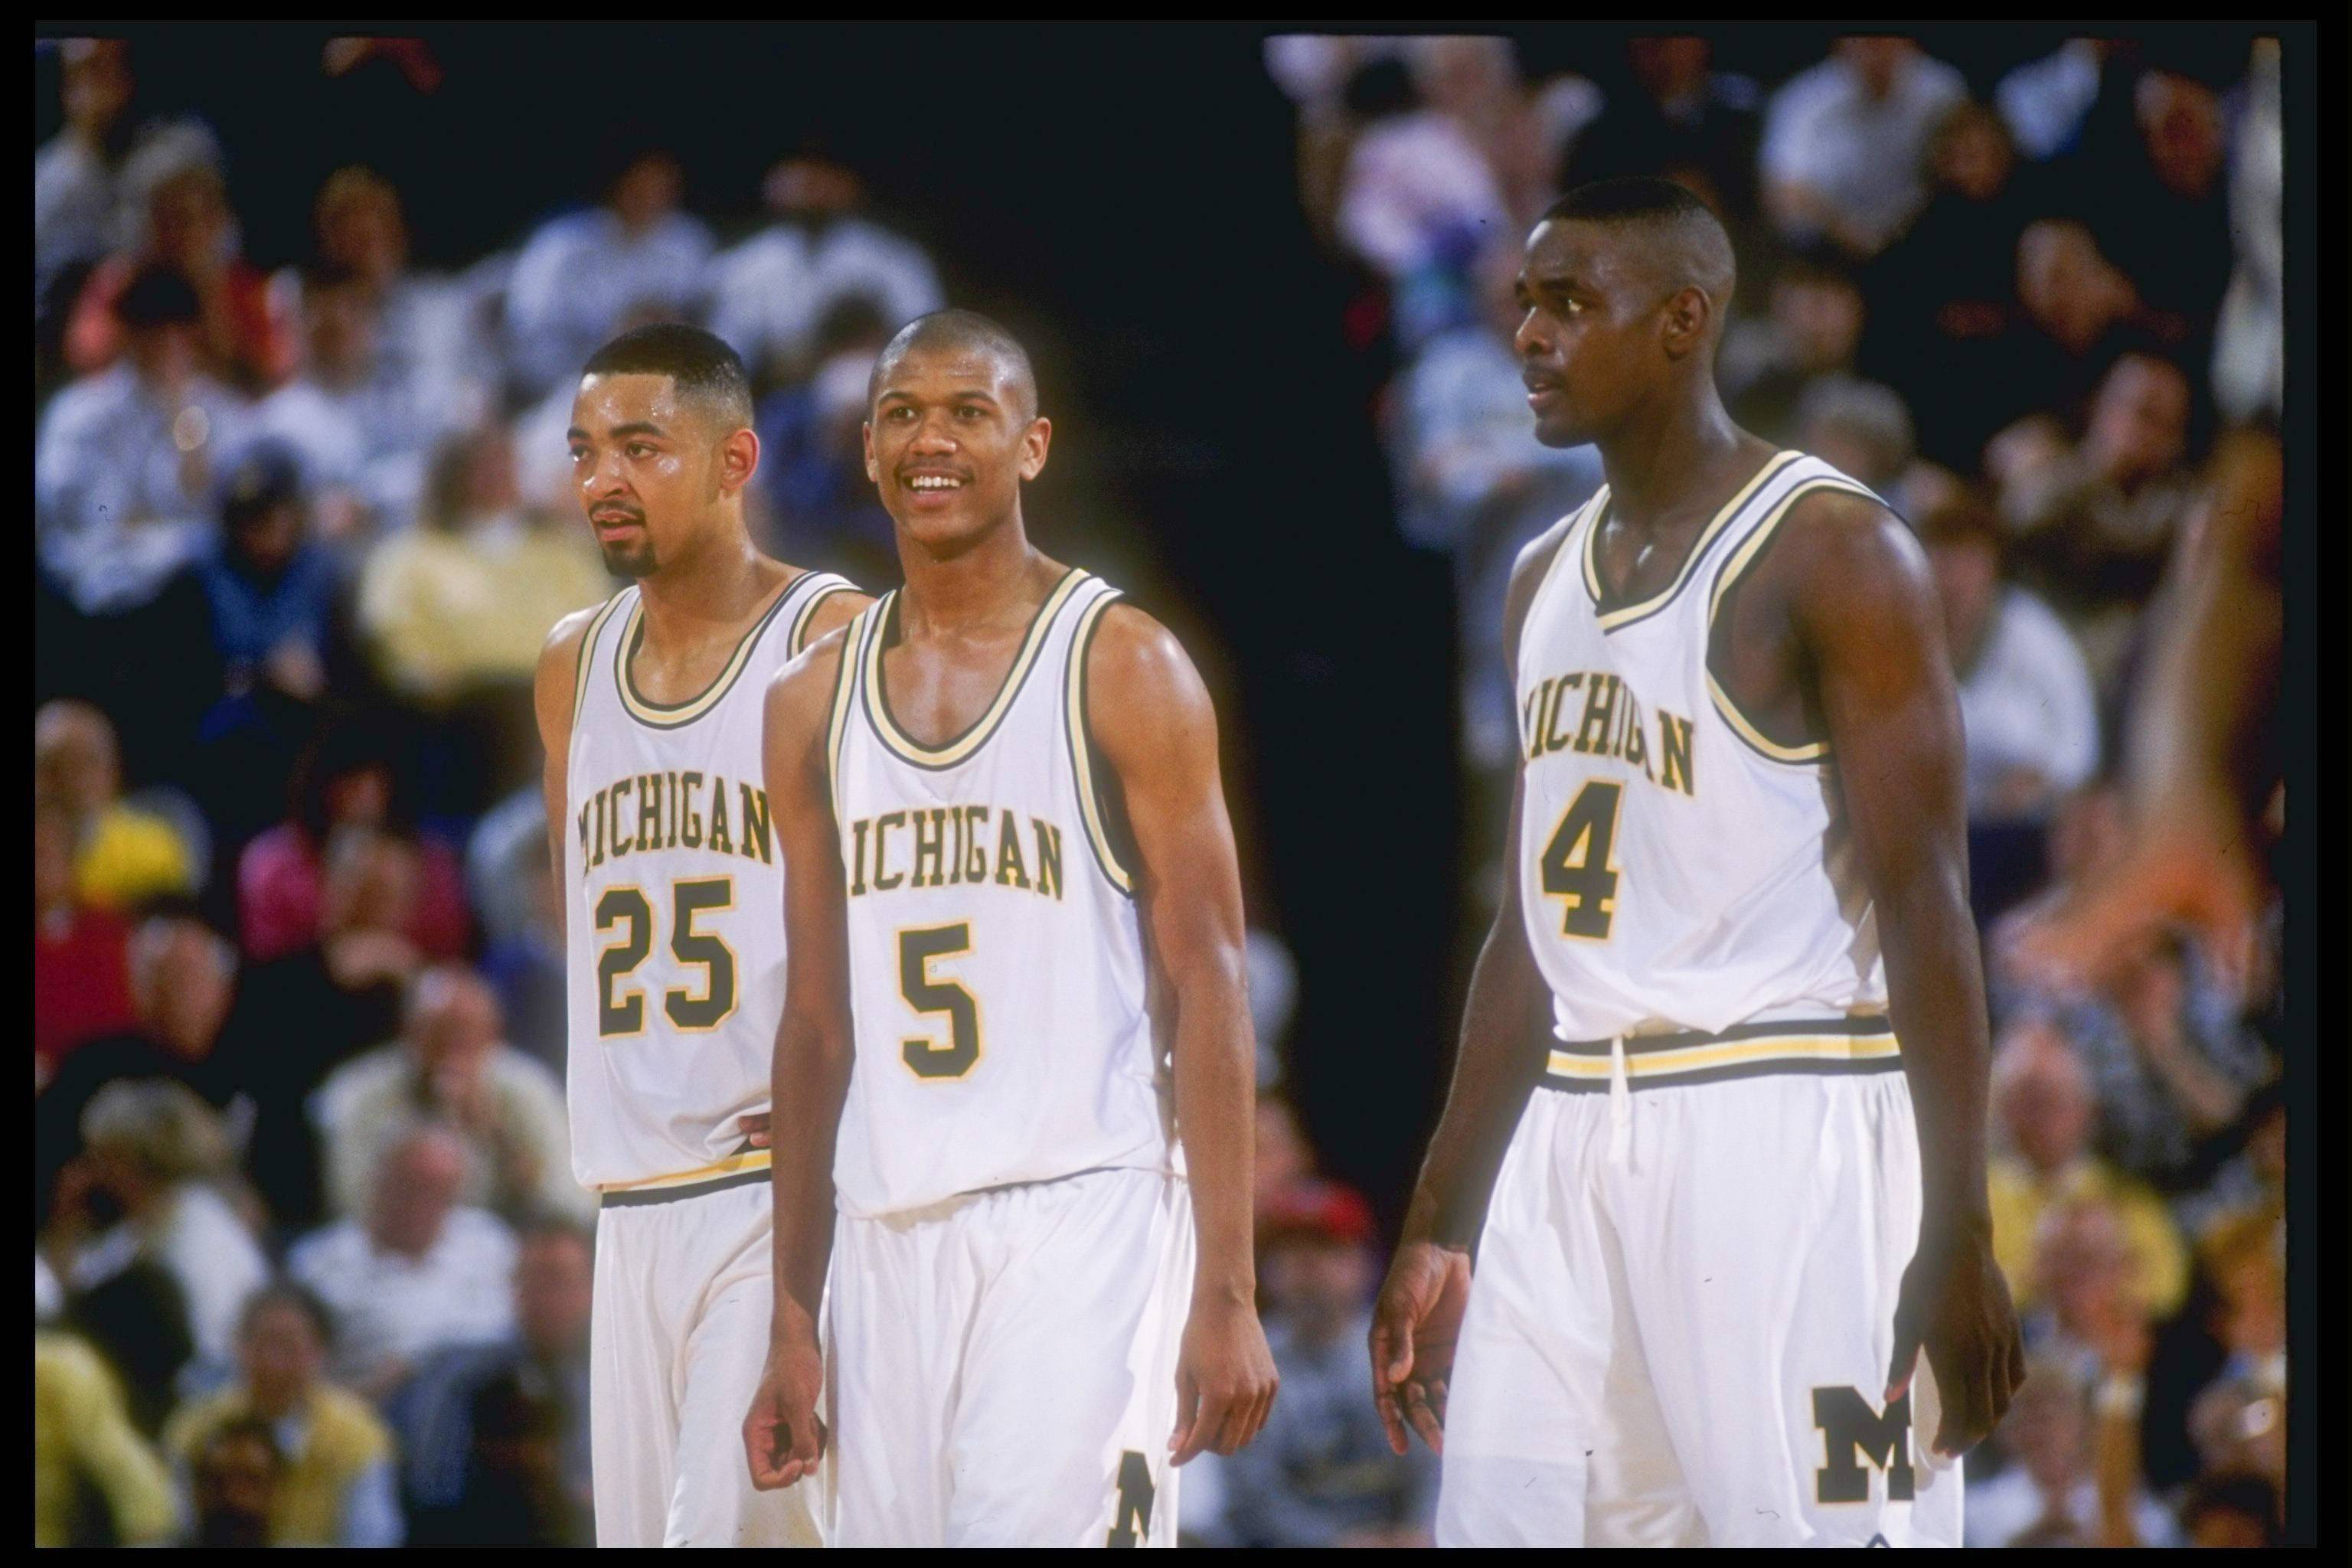 8 Mar 1992: Michigan Wolverines forward Juwan Howard, guard Jalen Rose, and forward Chris Webber (l to r) look on during a game against the Indiana Pacers.